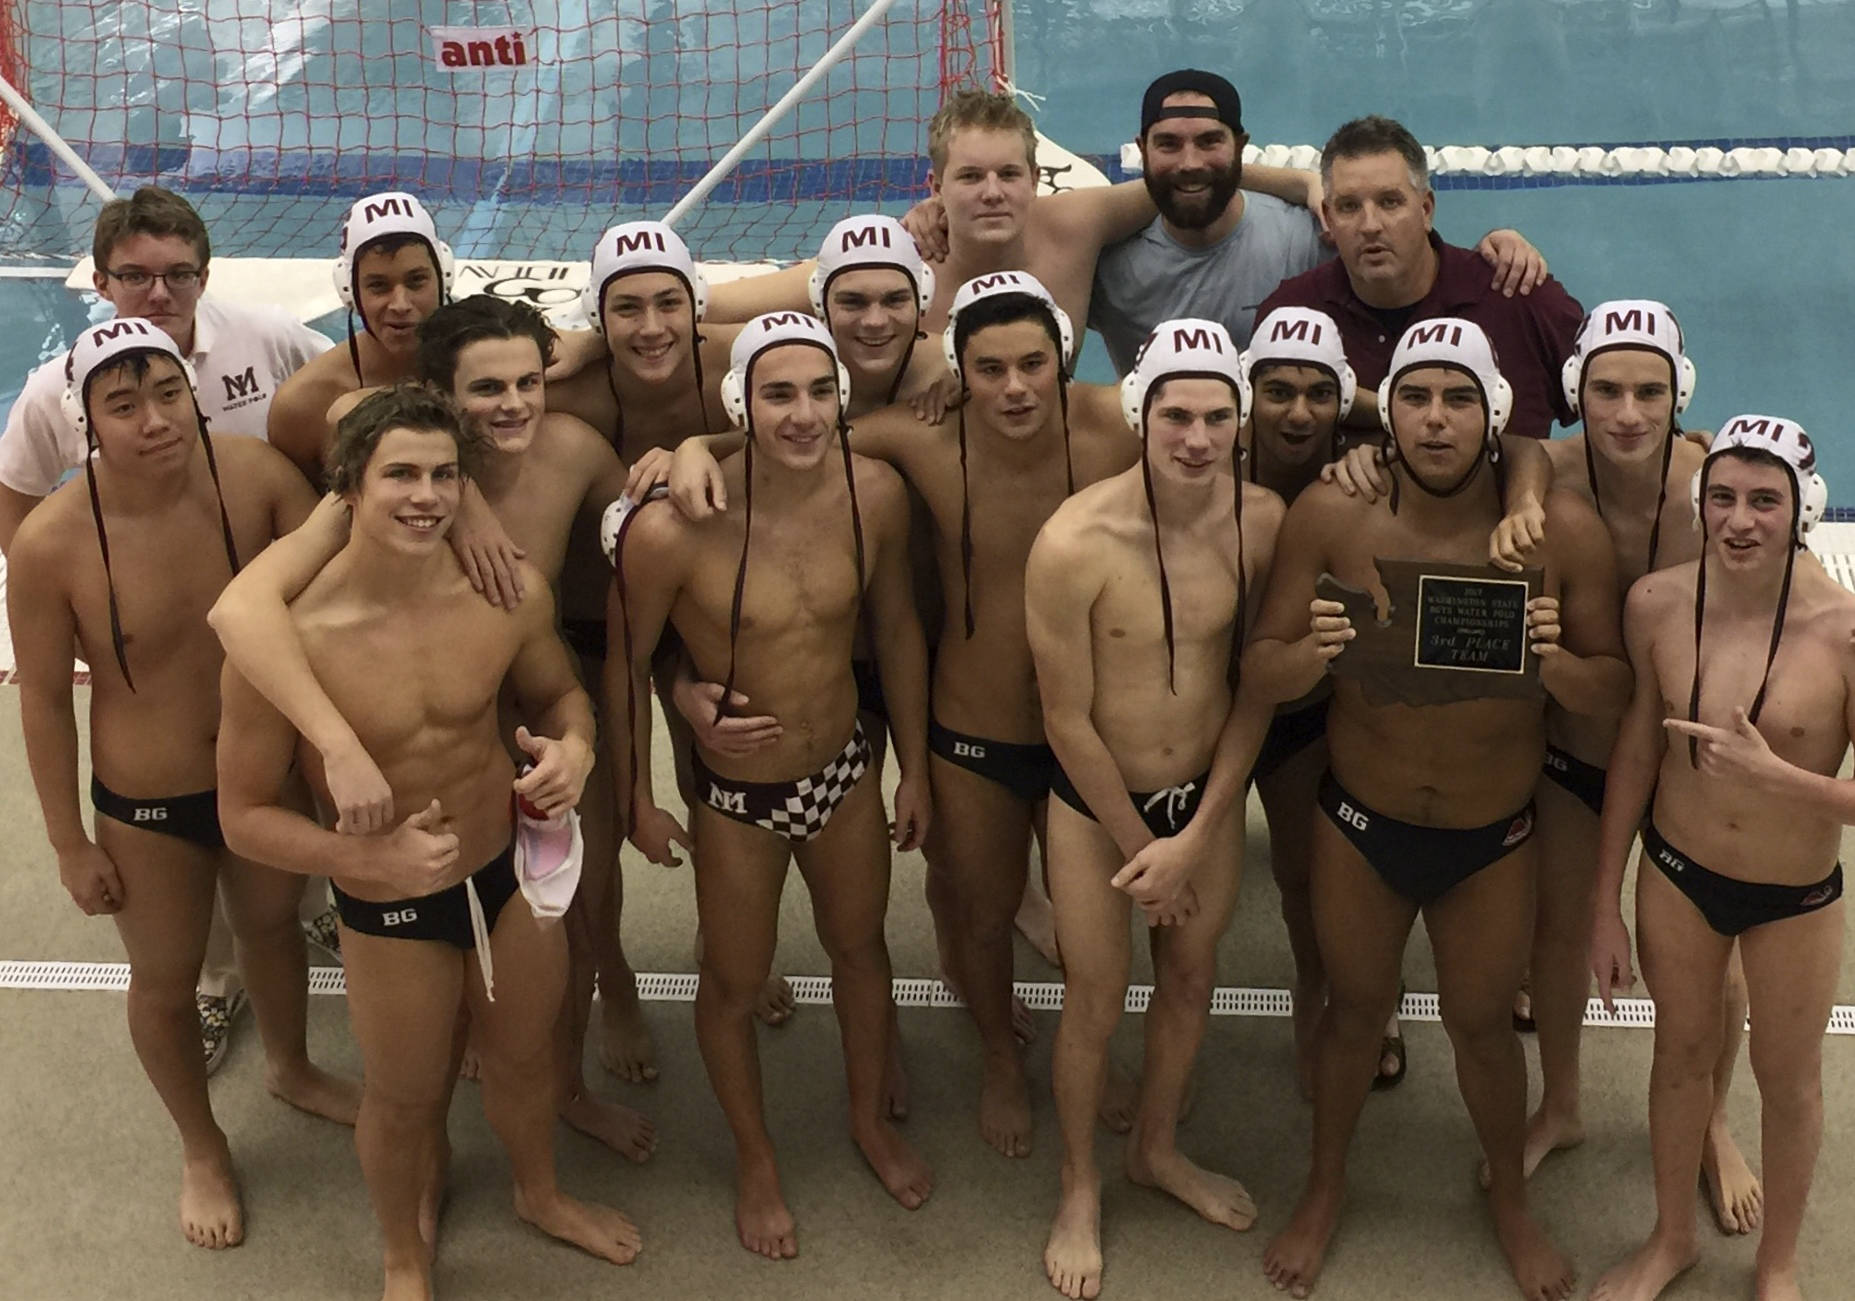 Photo courtesy of Susan Robinson                                The Mercer Island Islanders boys water polo team captured third place at the Washington high school water polo state tournament on Nov. 11 at the Curtis Aquatic Center in University Place.